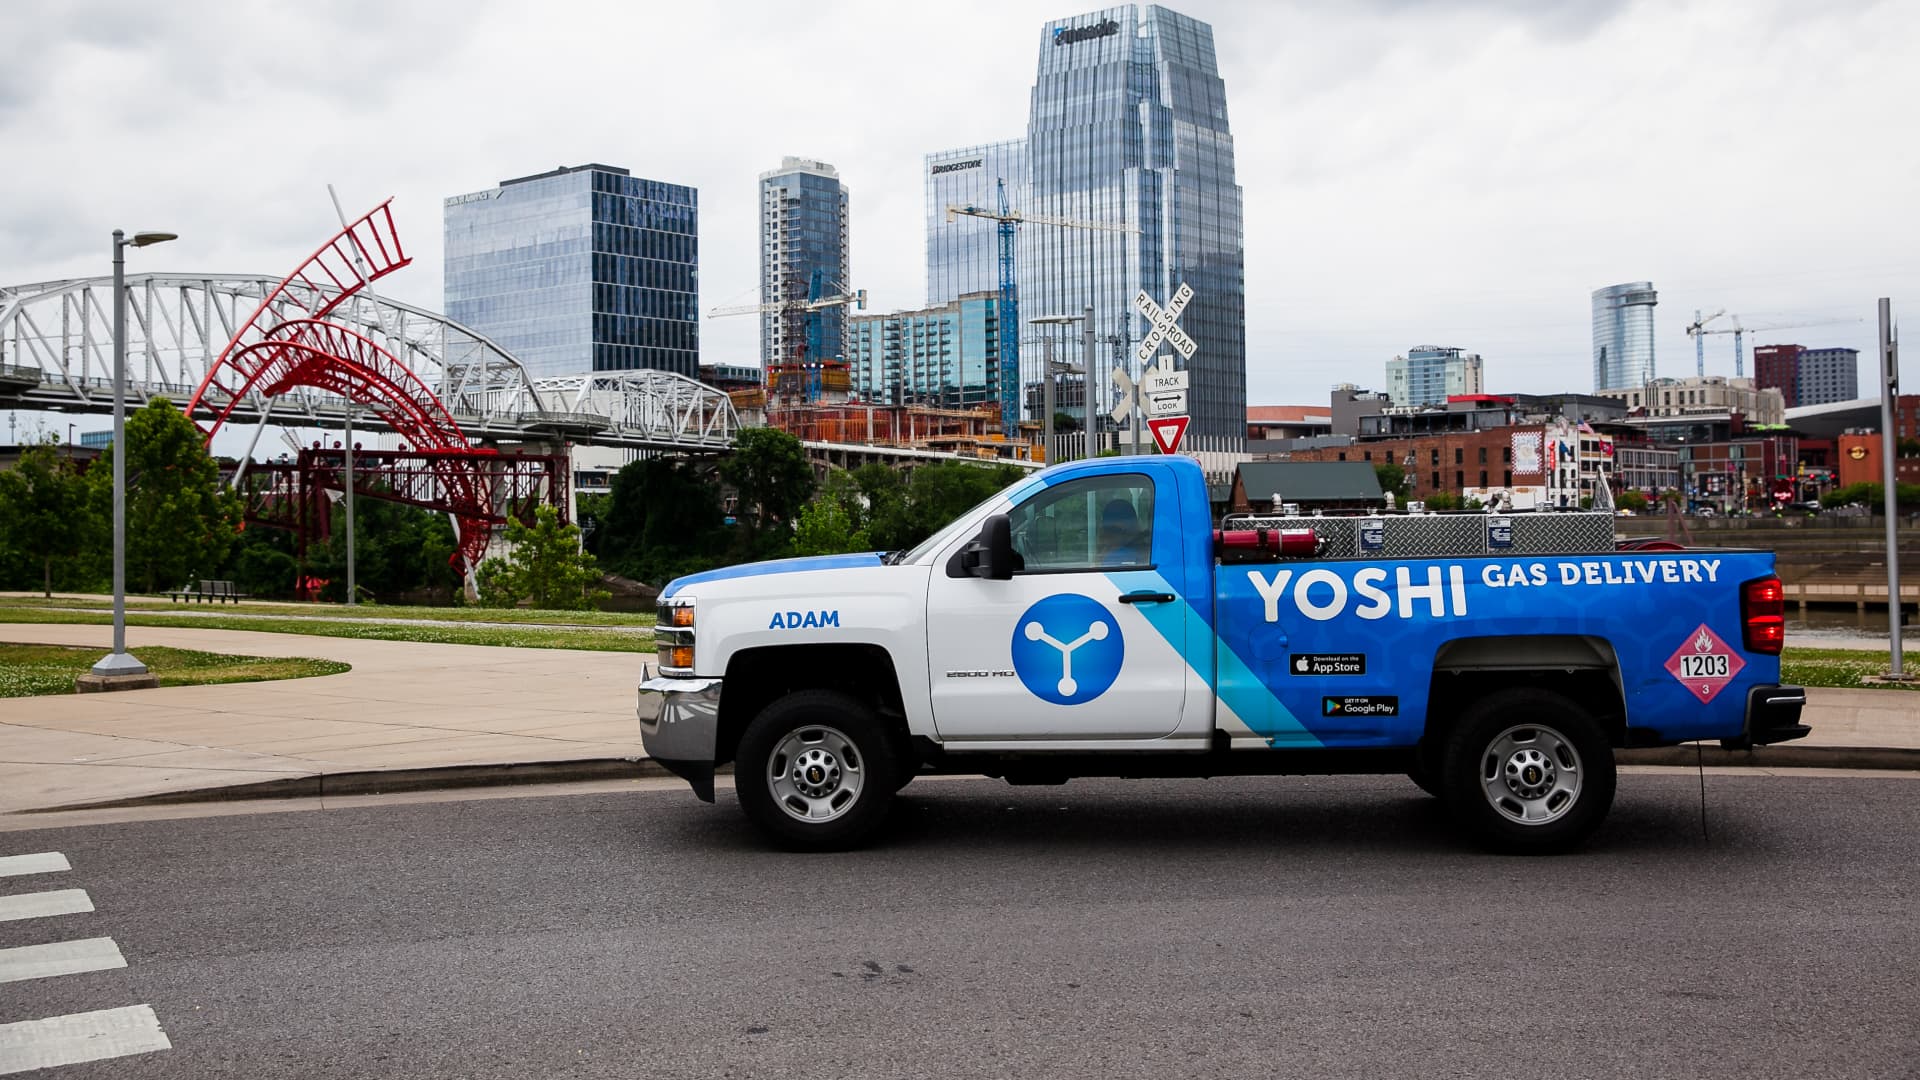 GM Ventures is leading a $23 million investment round into on-demand car maintenance service Yoshi.